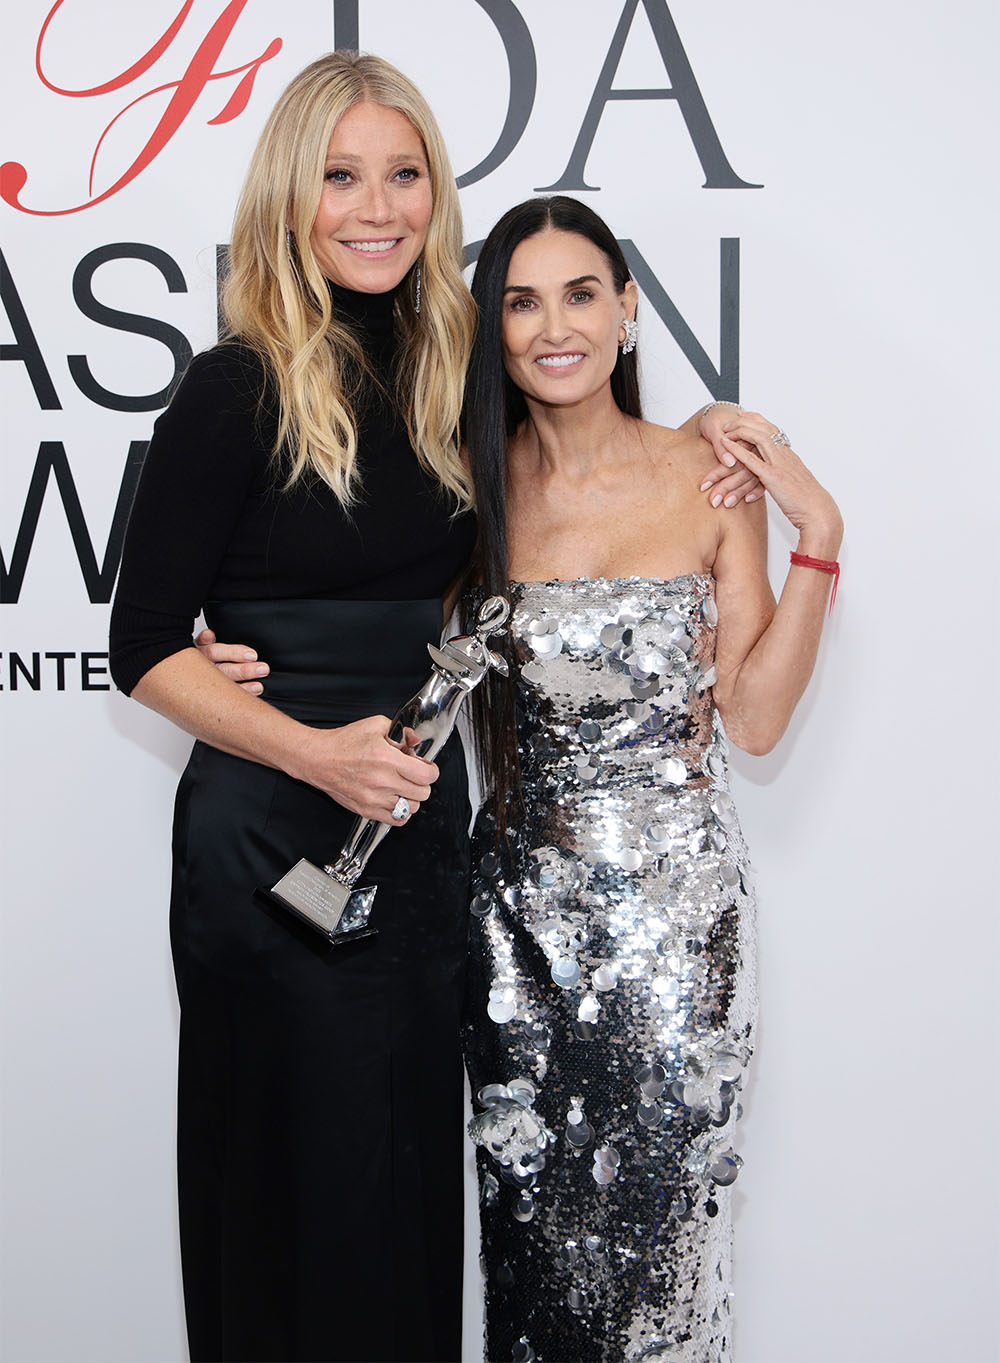 Gwyneth Paltrow and Demi Moore pose with an award at the 2023 CFDA Fashion Awards at American Museum of Natural History on November 06, 2023 in New York City.